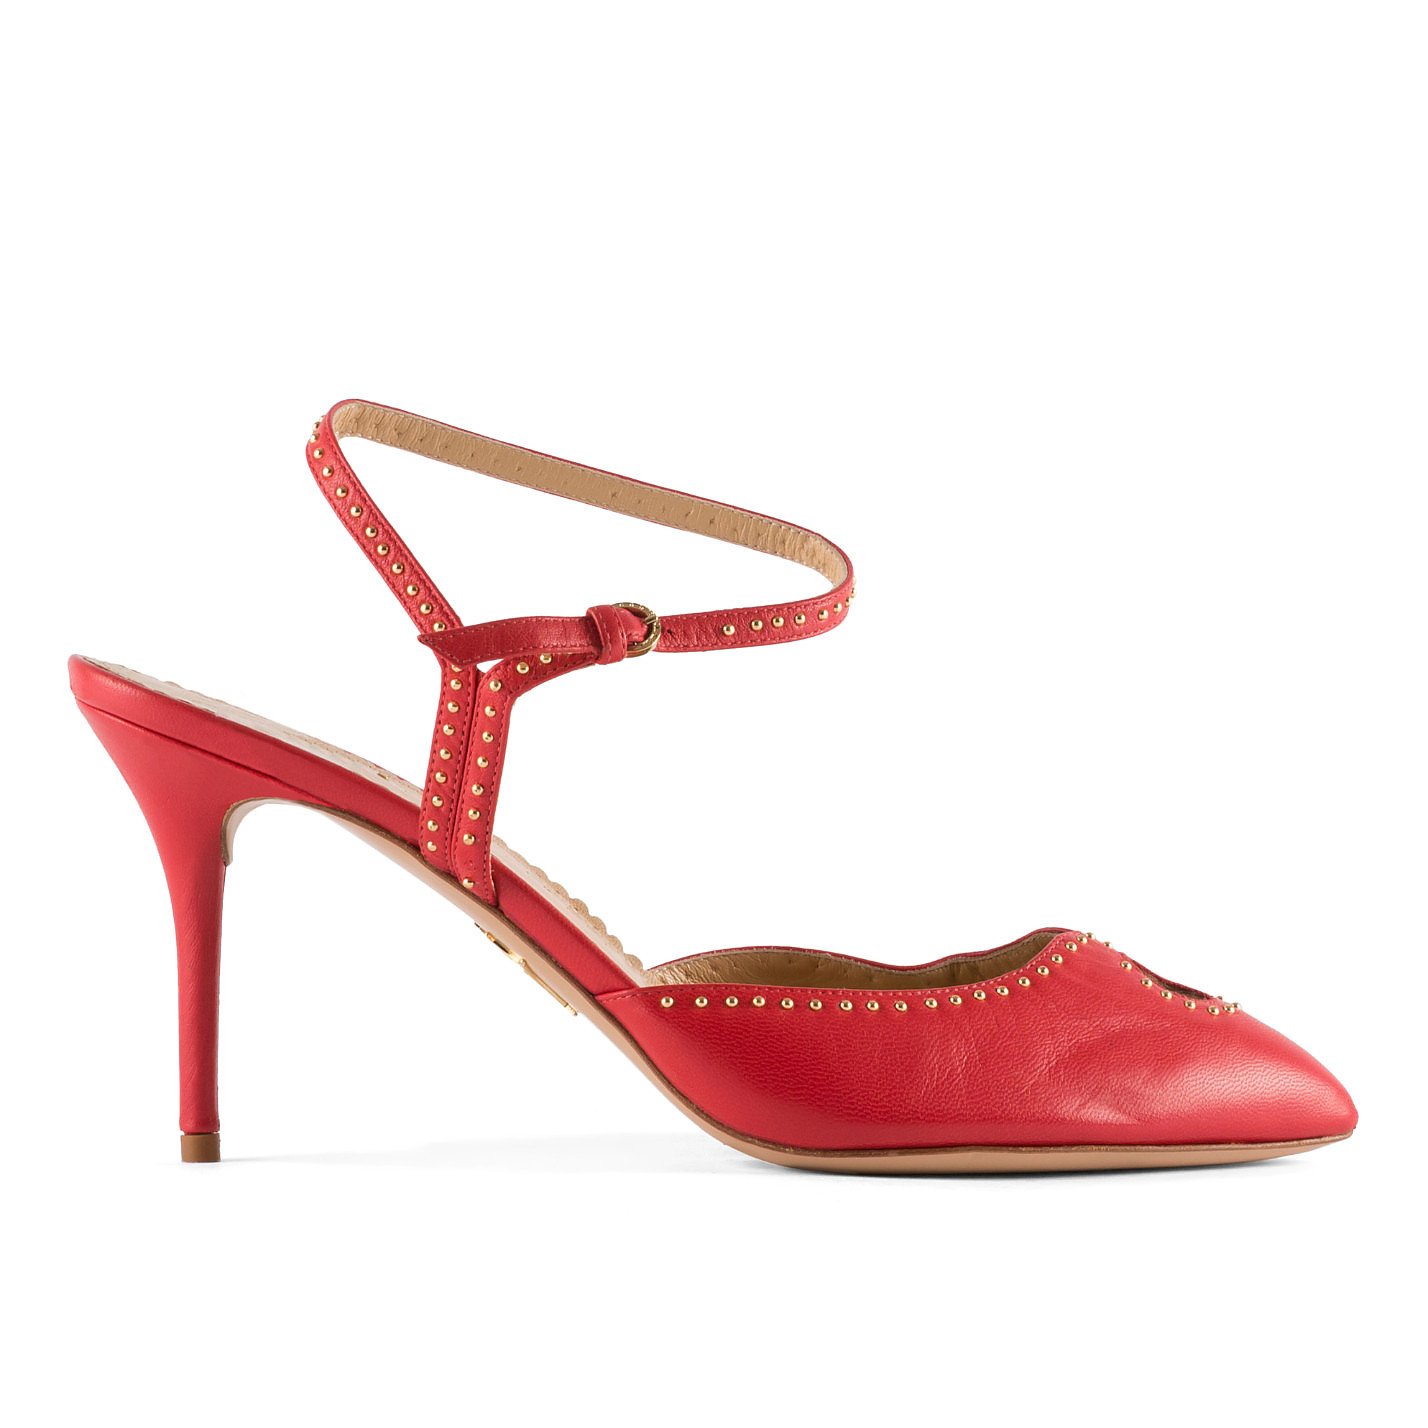 Charlotte Olympia Studded Leather Pumps